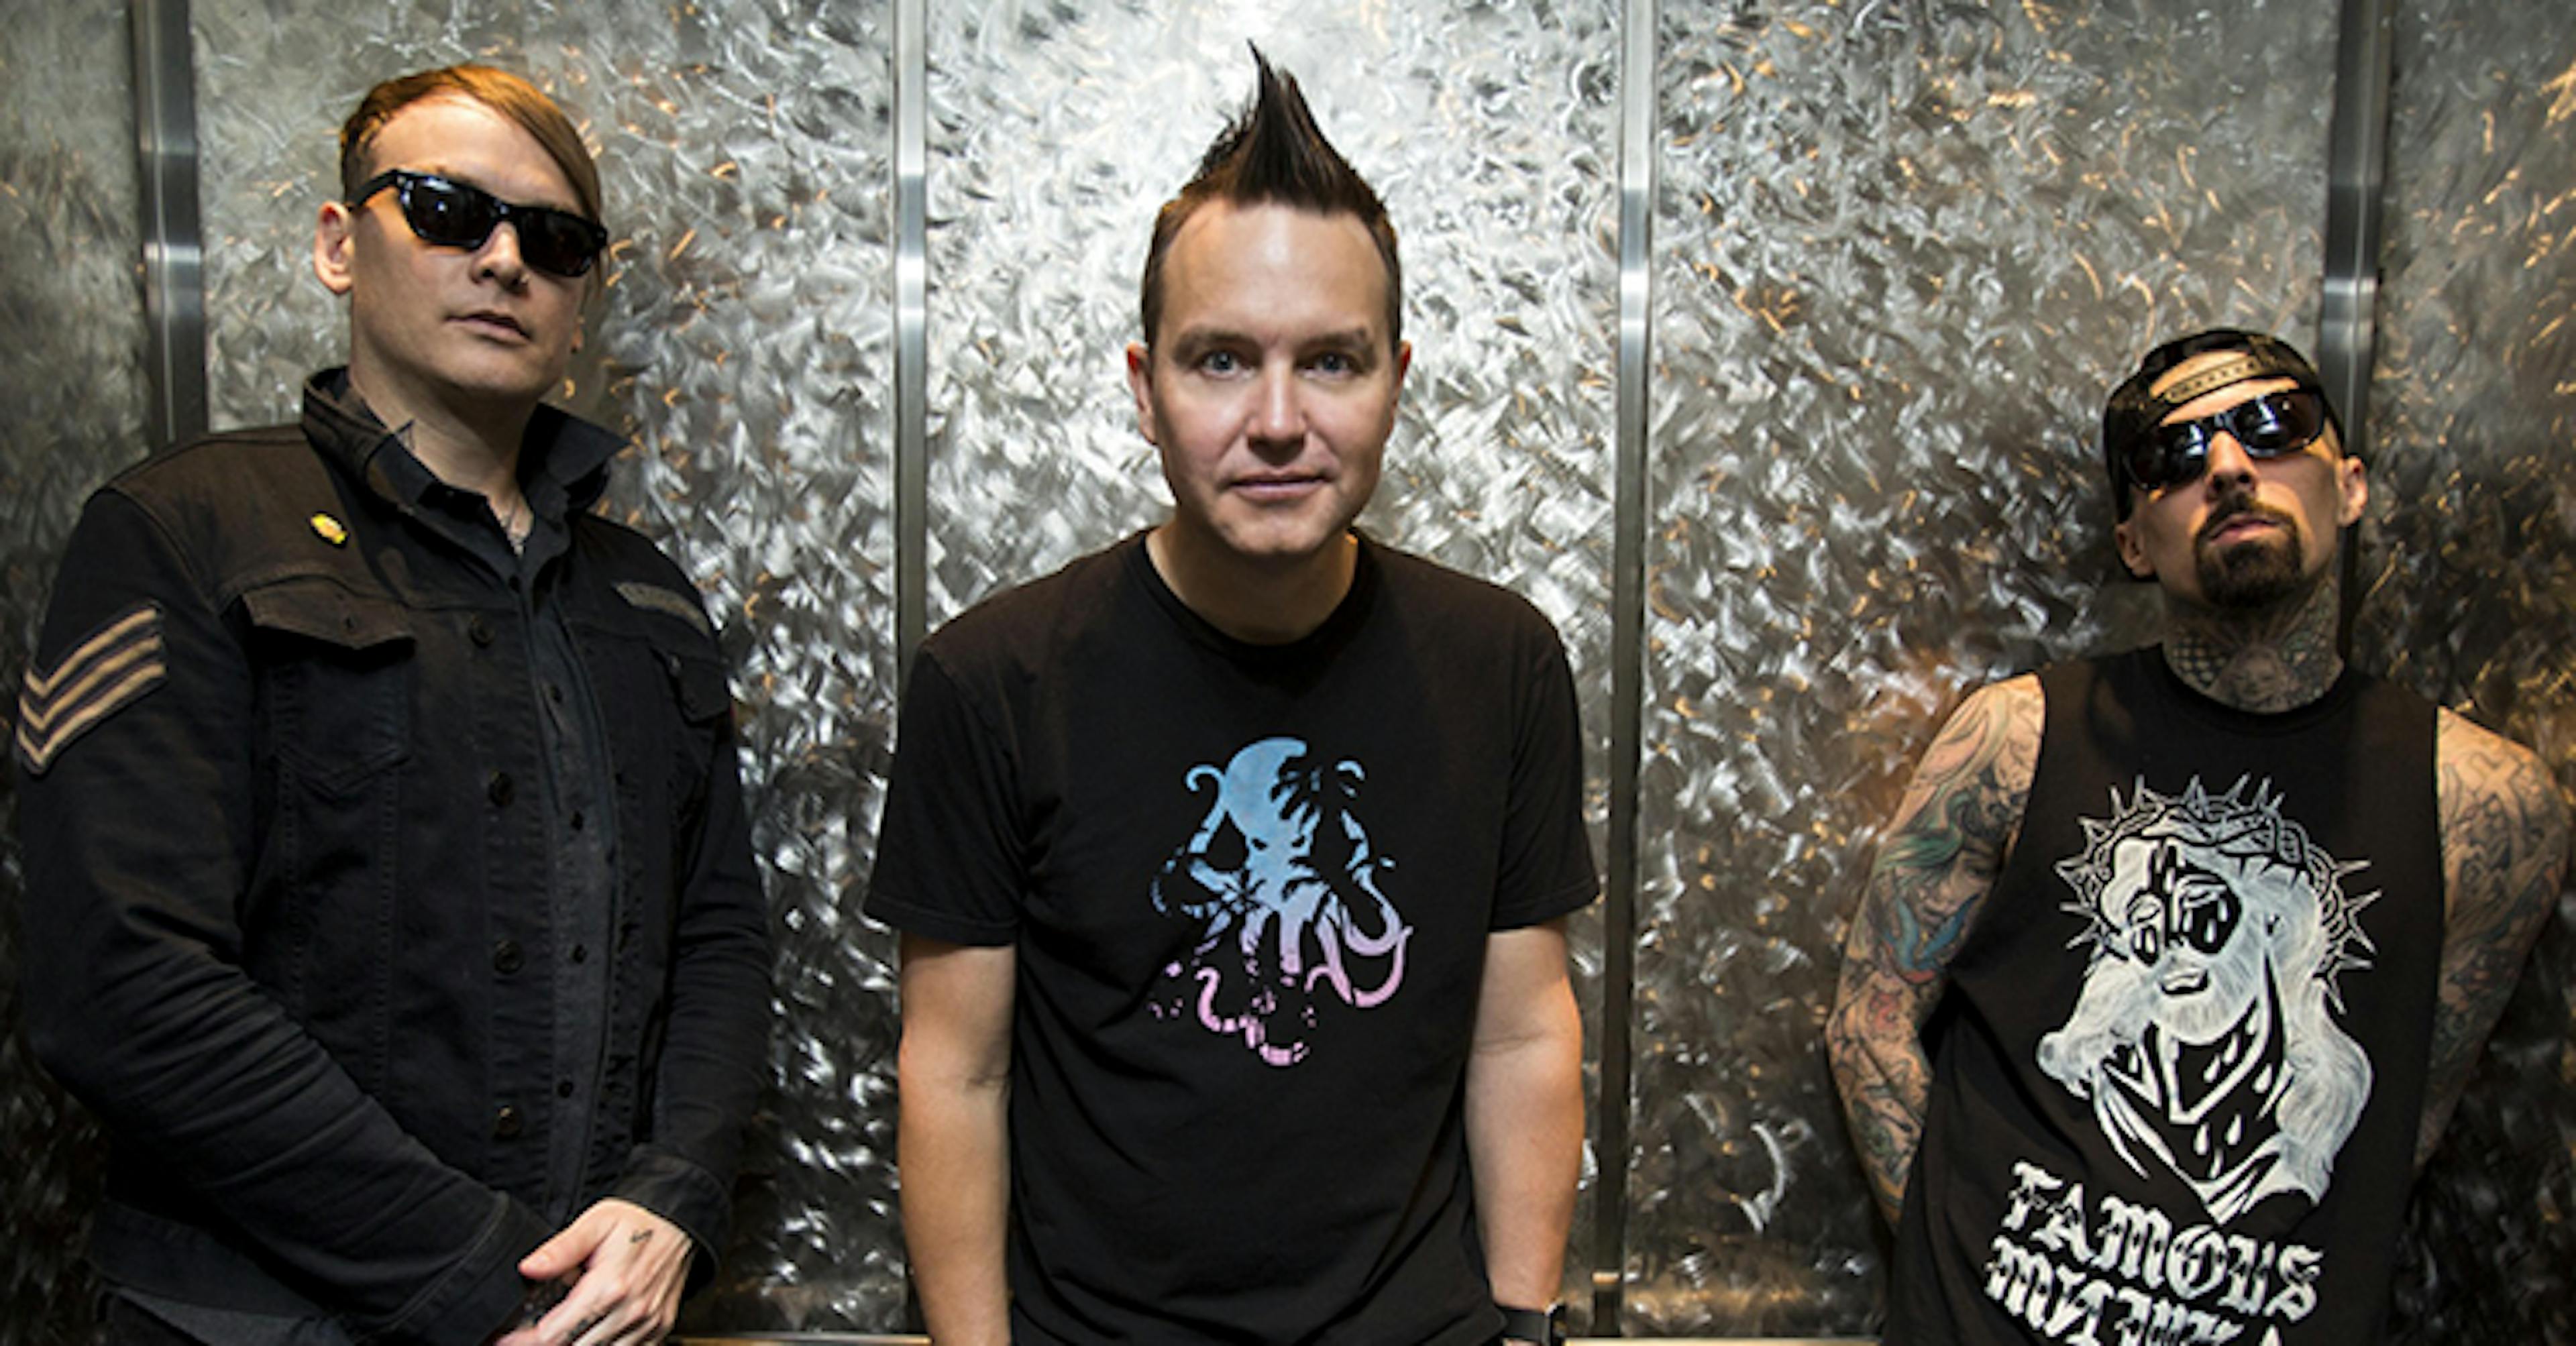 blink-182 Have Cancelled Their Riot Fest Set And Upcoming Tour